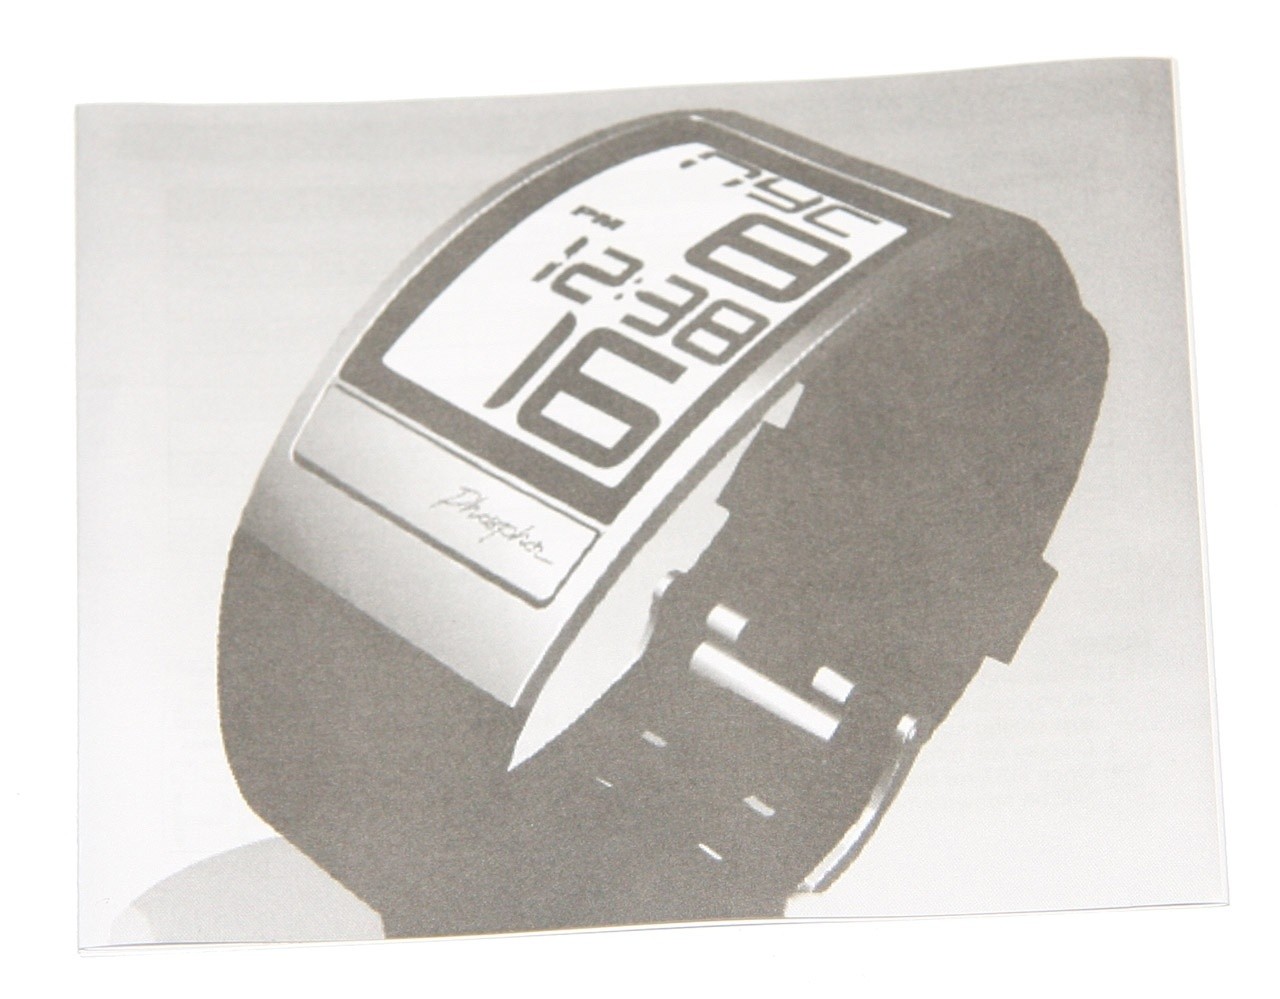 3820 09 quick review phosphor world time curved e ink watch full